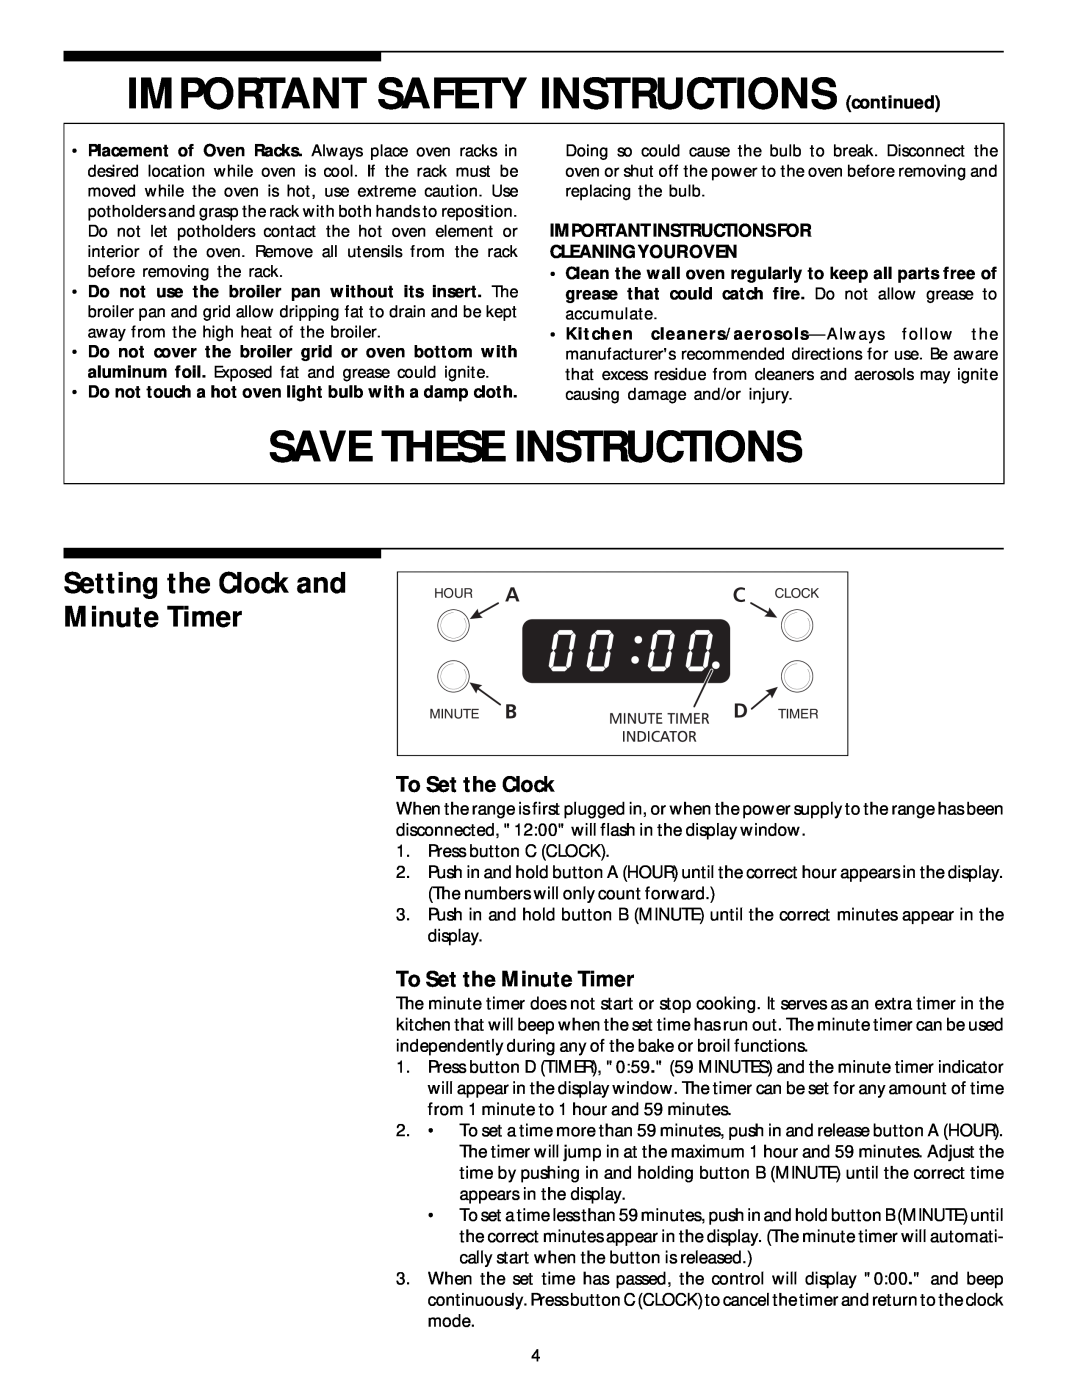 Frigidaire Electric Built- in oven IMPORTANT SAFETY INSTRUCTIONS continued, Save These Instructions, To Set the Clock 